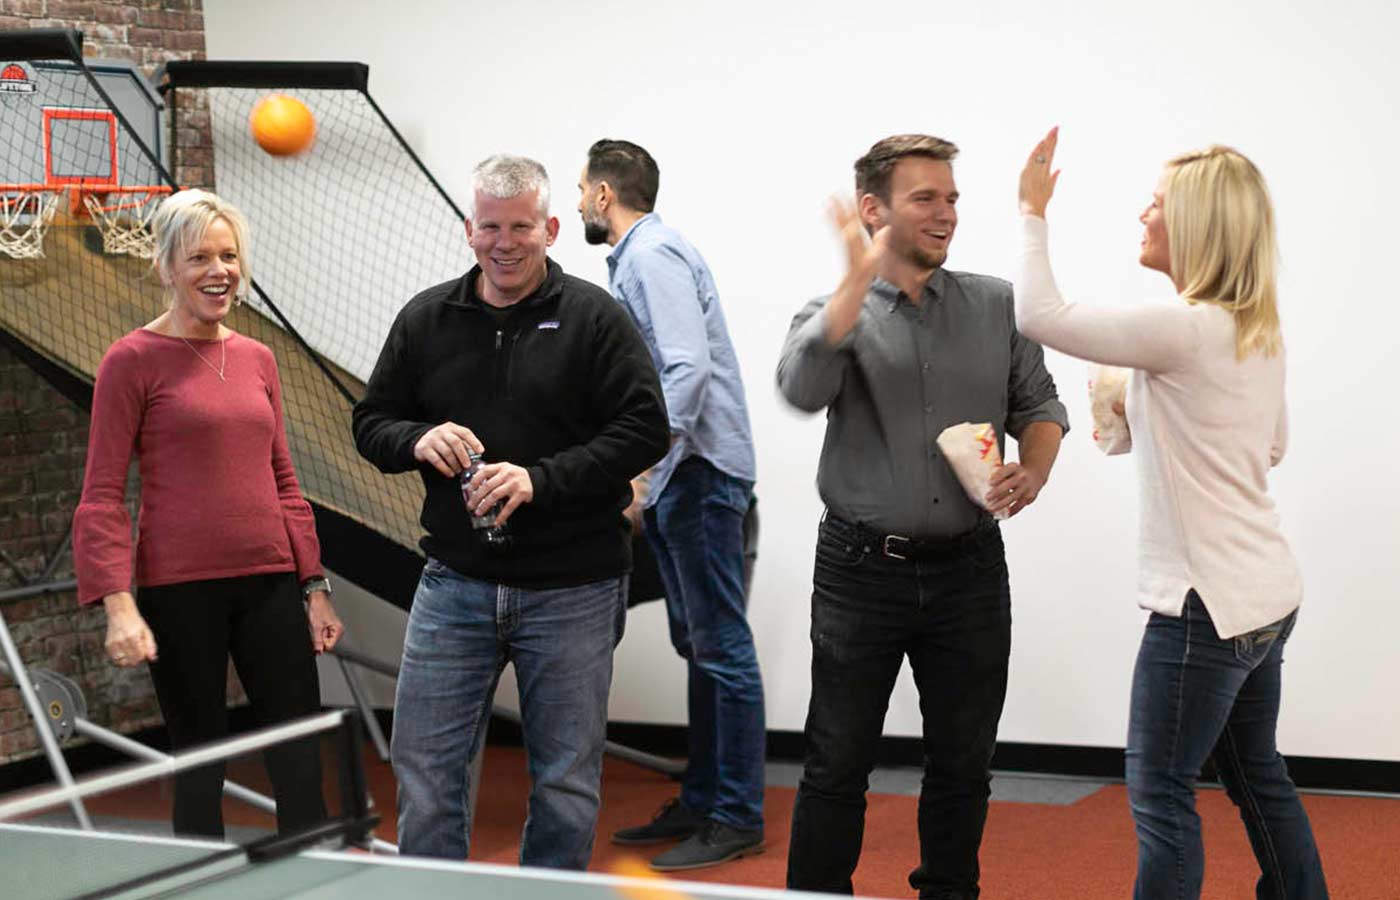 LimoLink team members lauch in the breakroom while playing ping pong